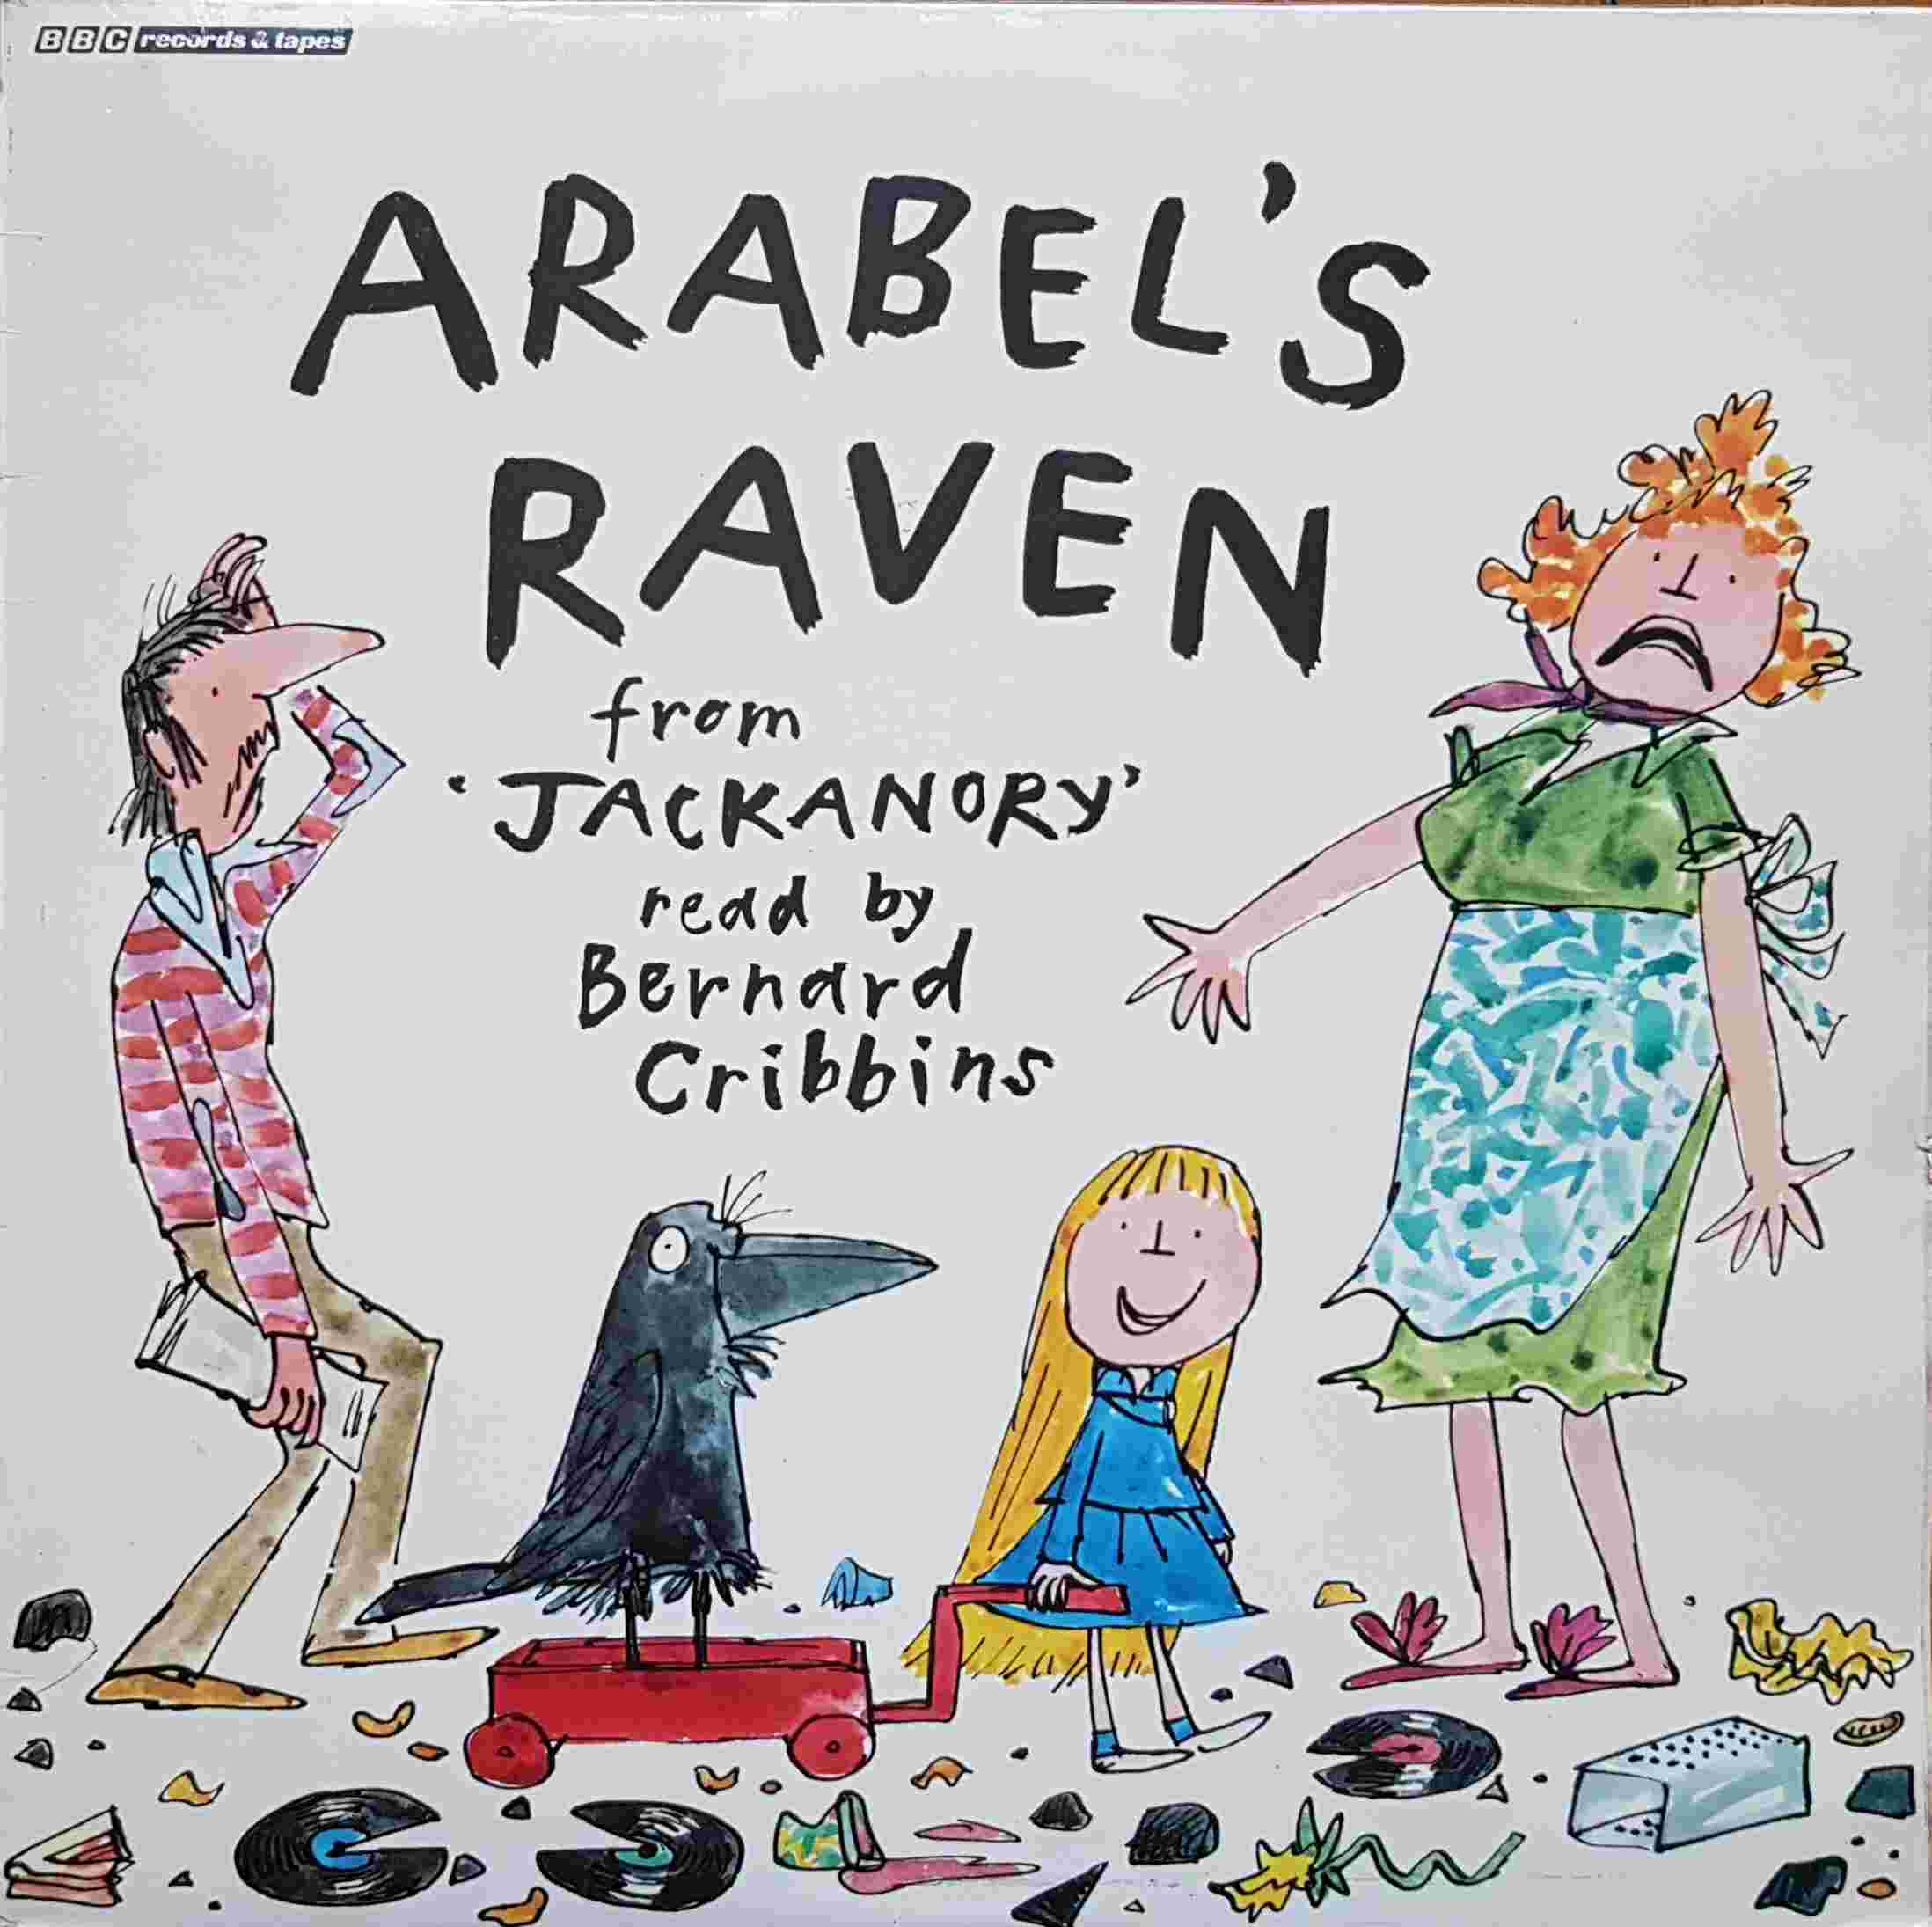 Picture of REC 292 Jackanory - Arabel's raven by artist Bernard Cribbins from the BBC records and Tapes library